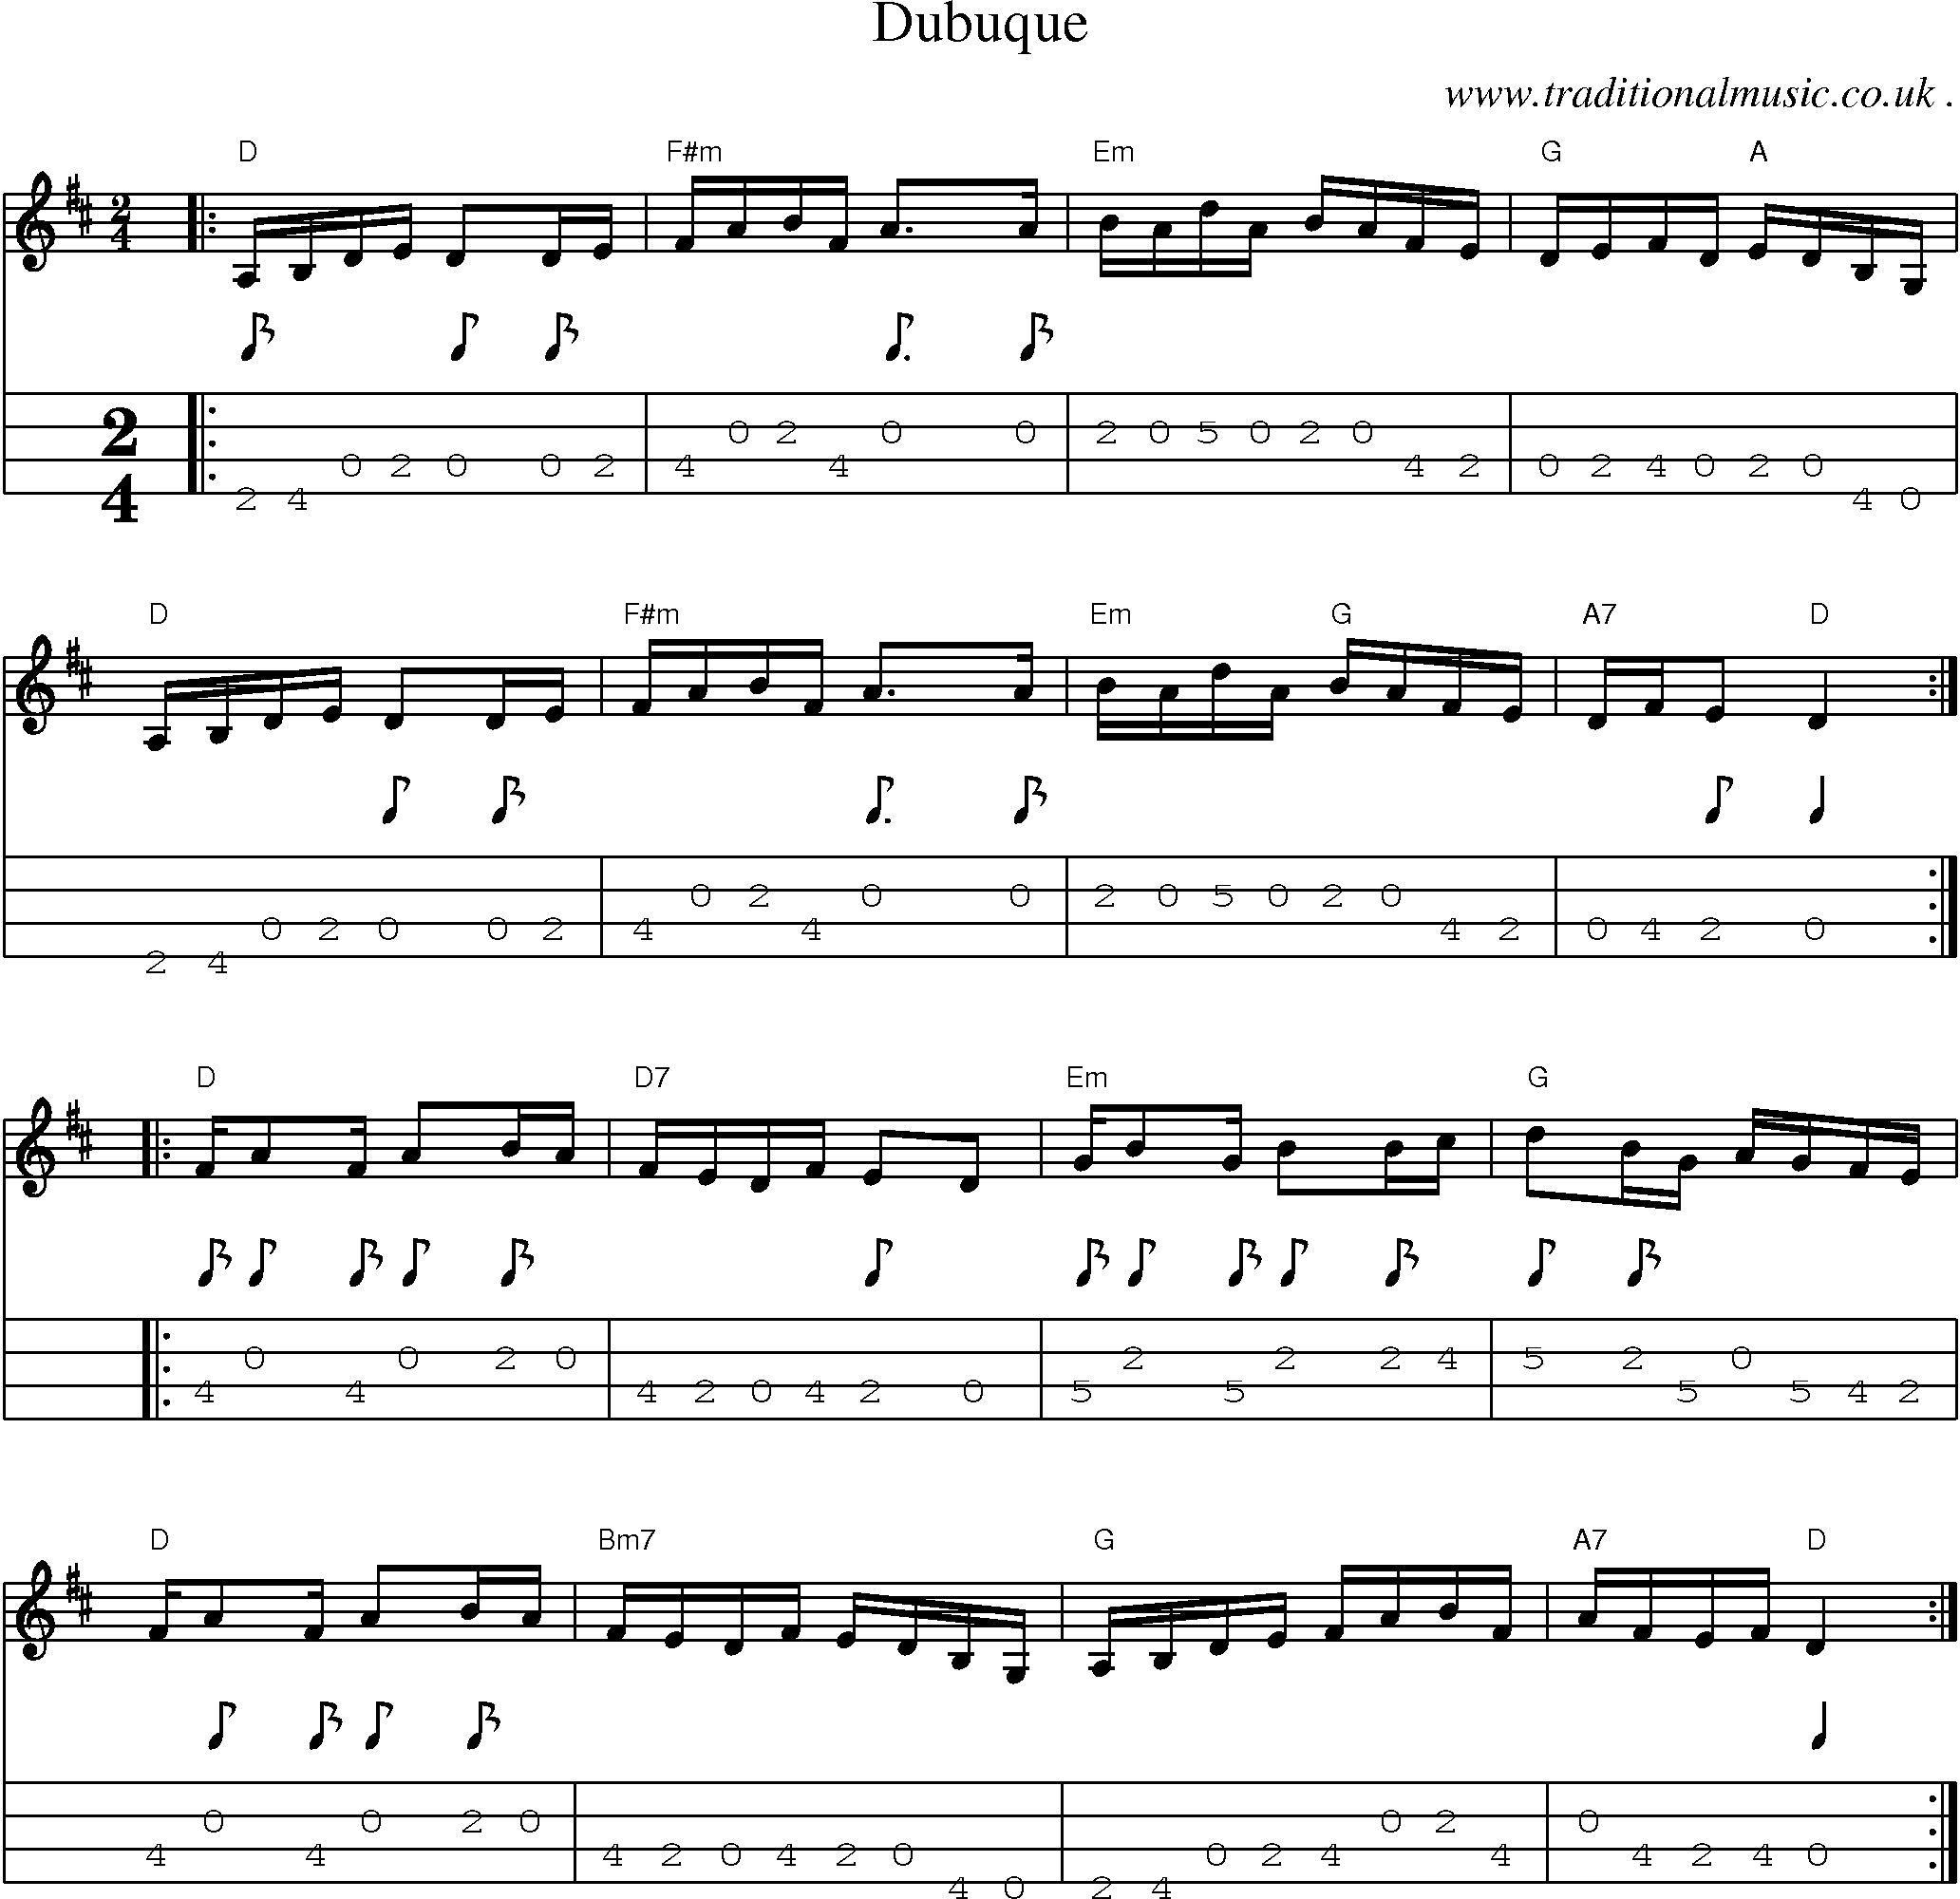 Music Score and Guitar Tabs for Dubuque